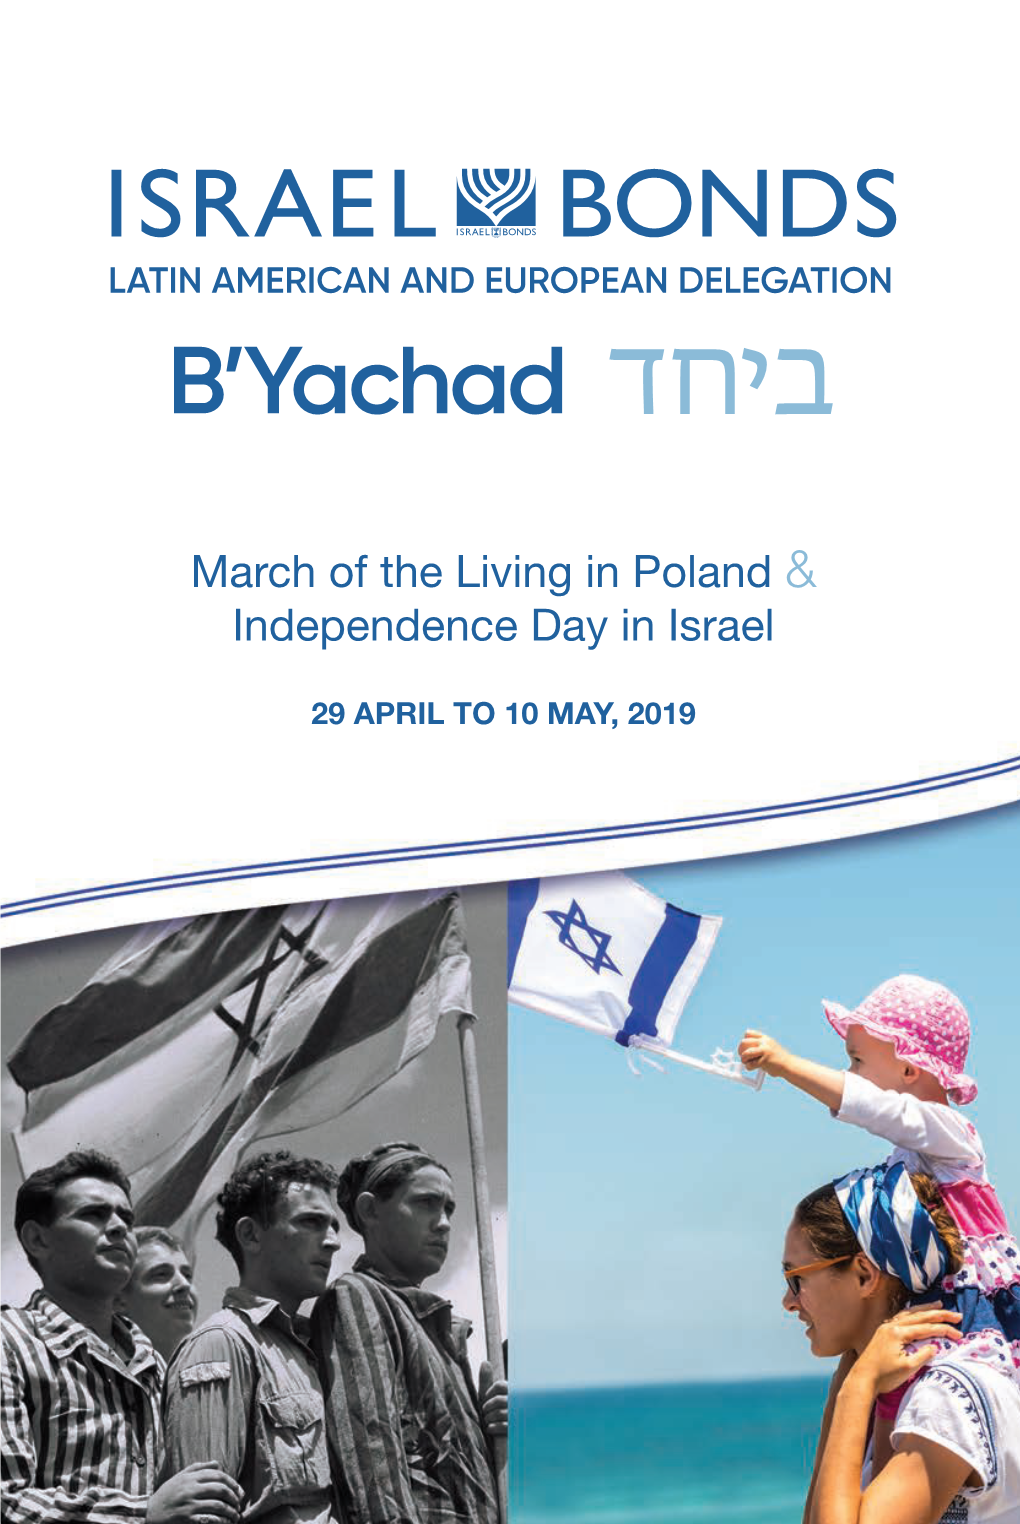 March of the Living in Poland & Independence Day in Israel